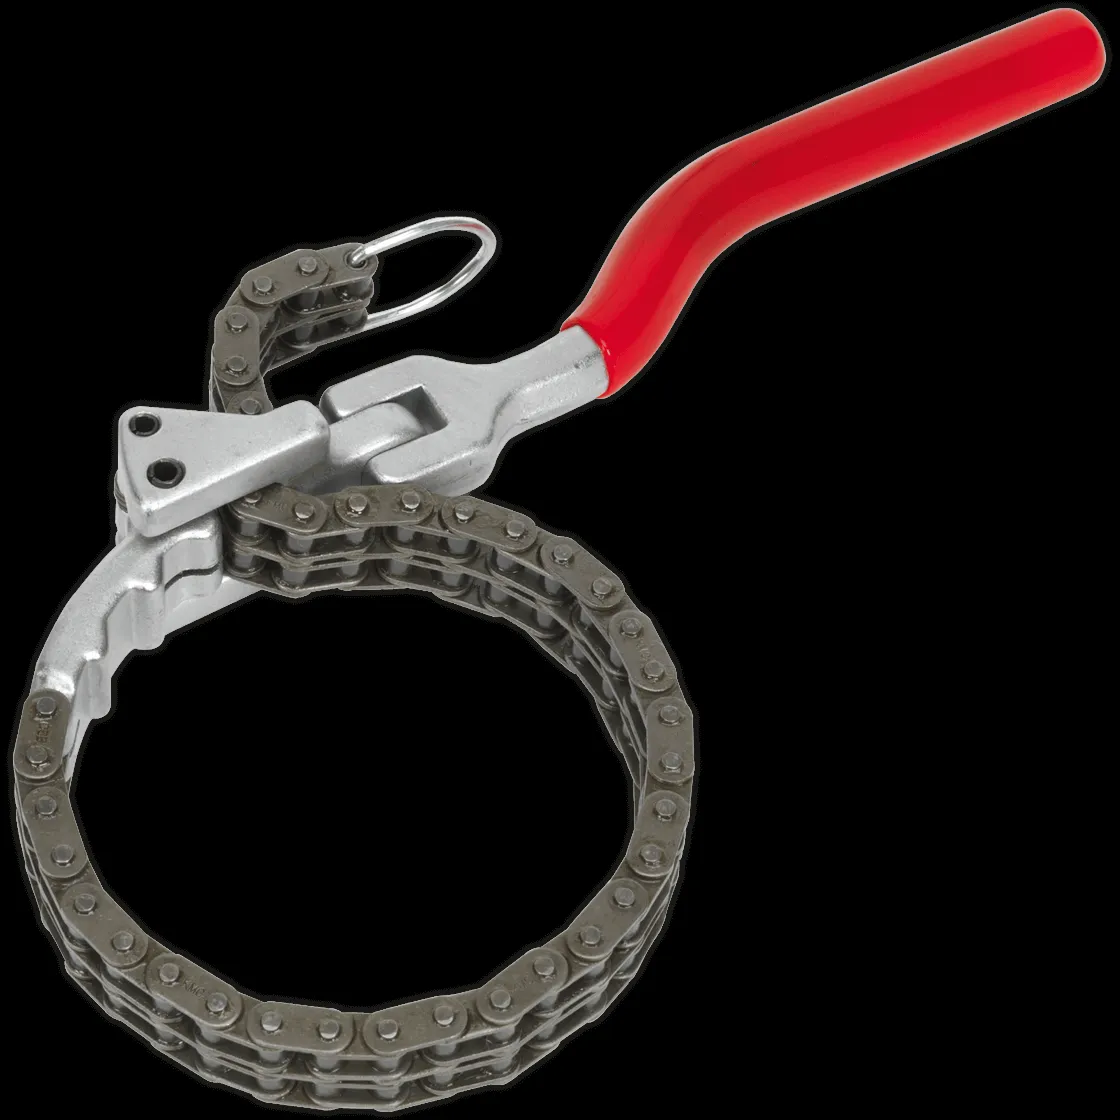 Sealey Oil Filter Chain Wrench - 105mm